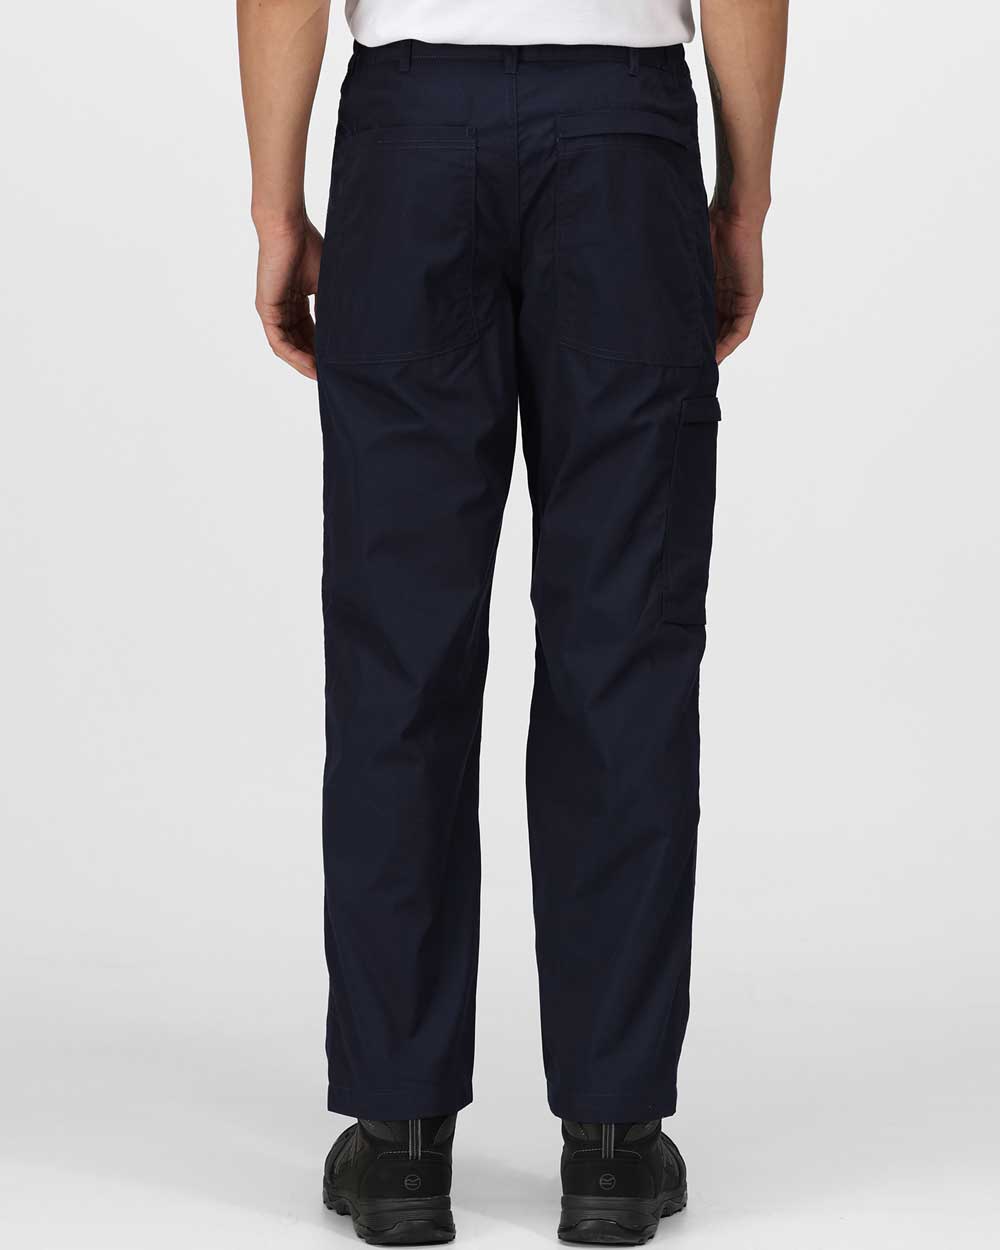 Regatta Lined Action Trousers in Navy 